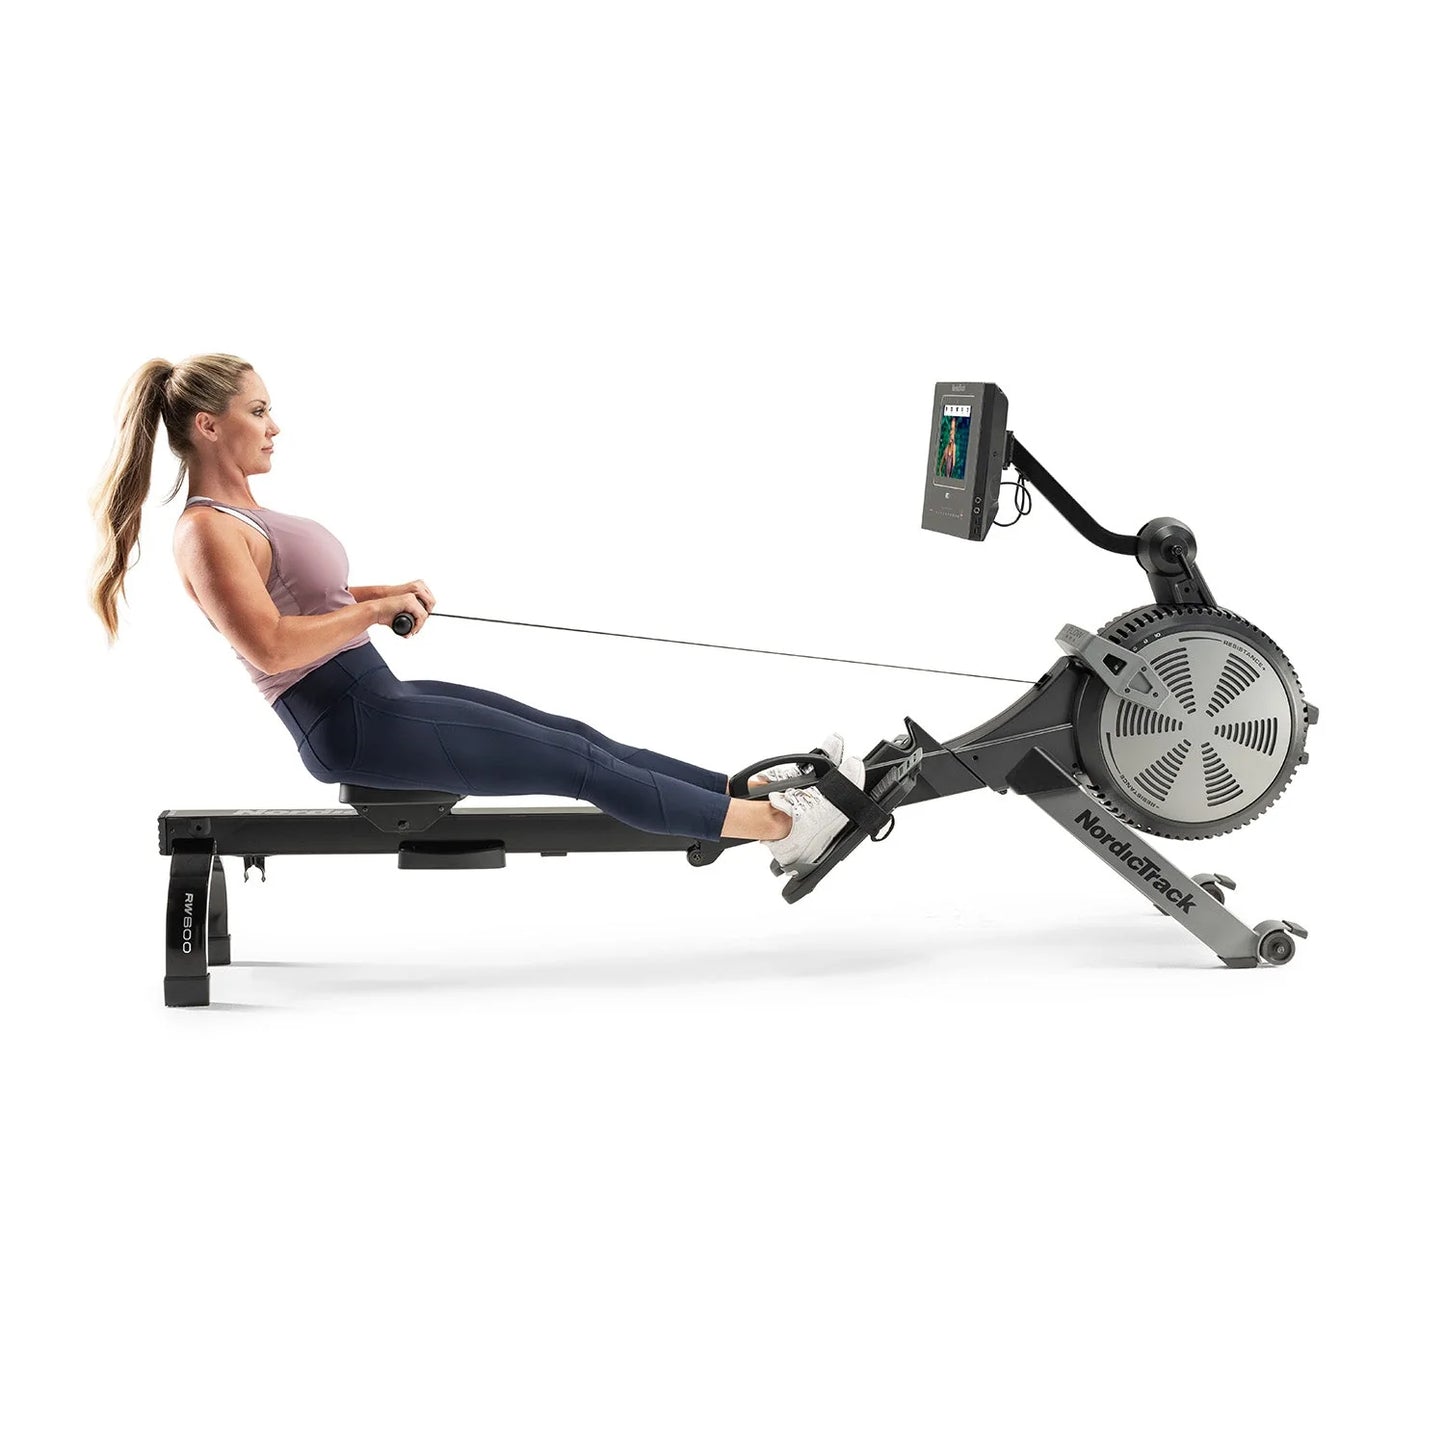 NordicTrack RW600 Rowing Machine - 30-Day iFit Membership Included